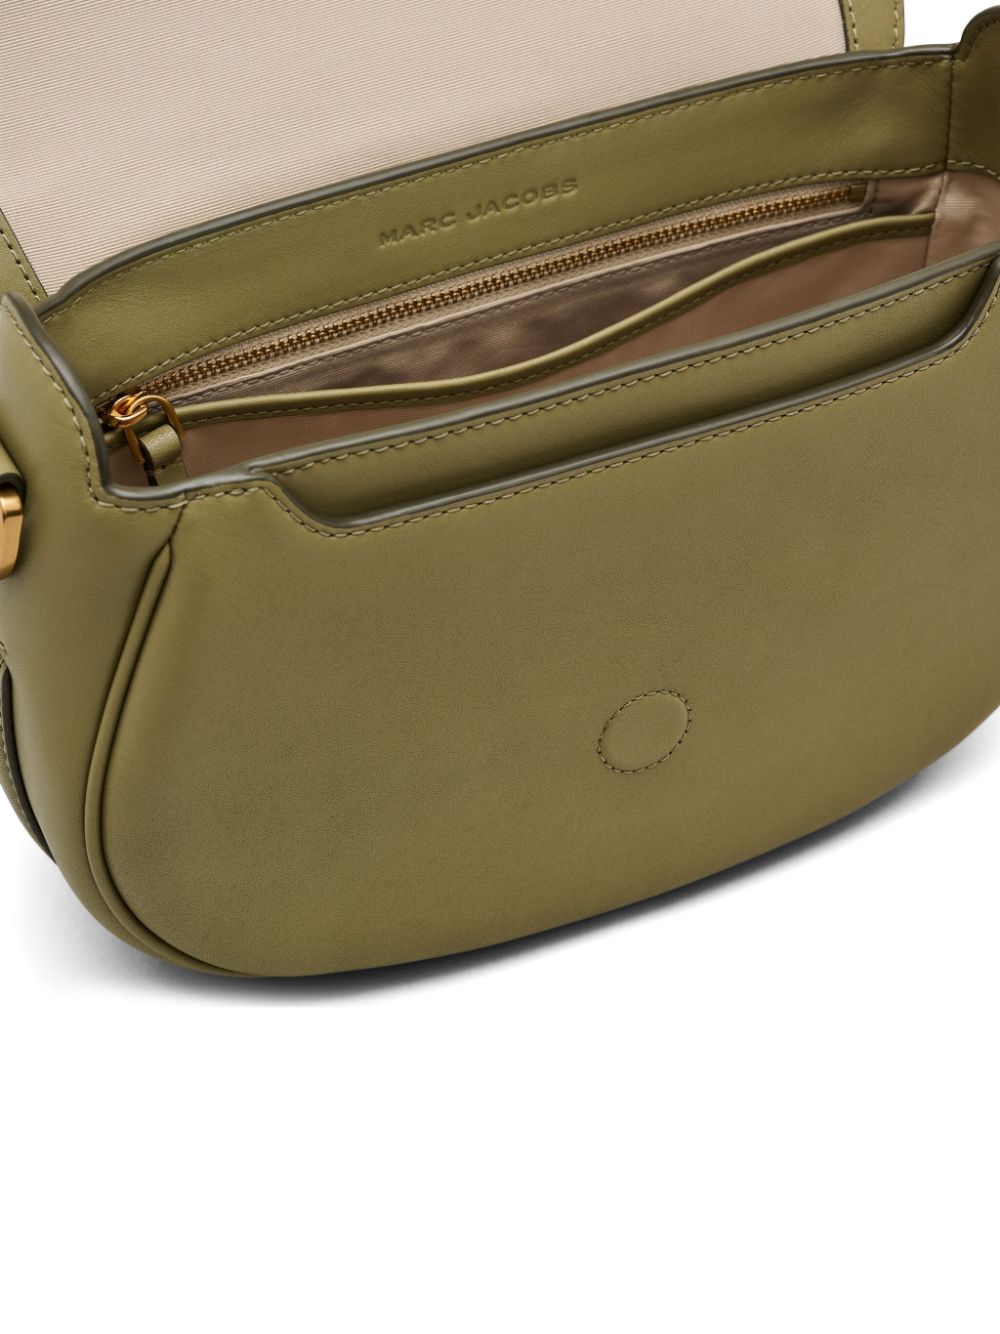 Marc Jacobs The Large Saddle tas Groen